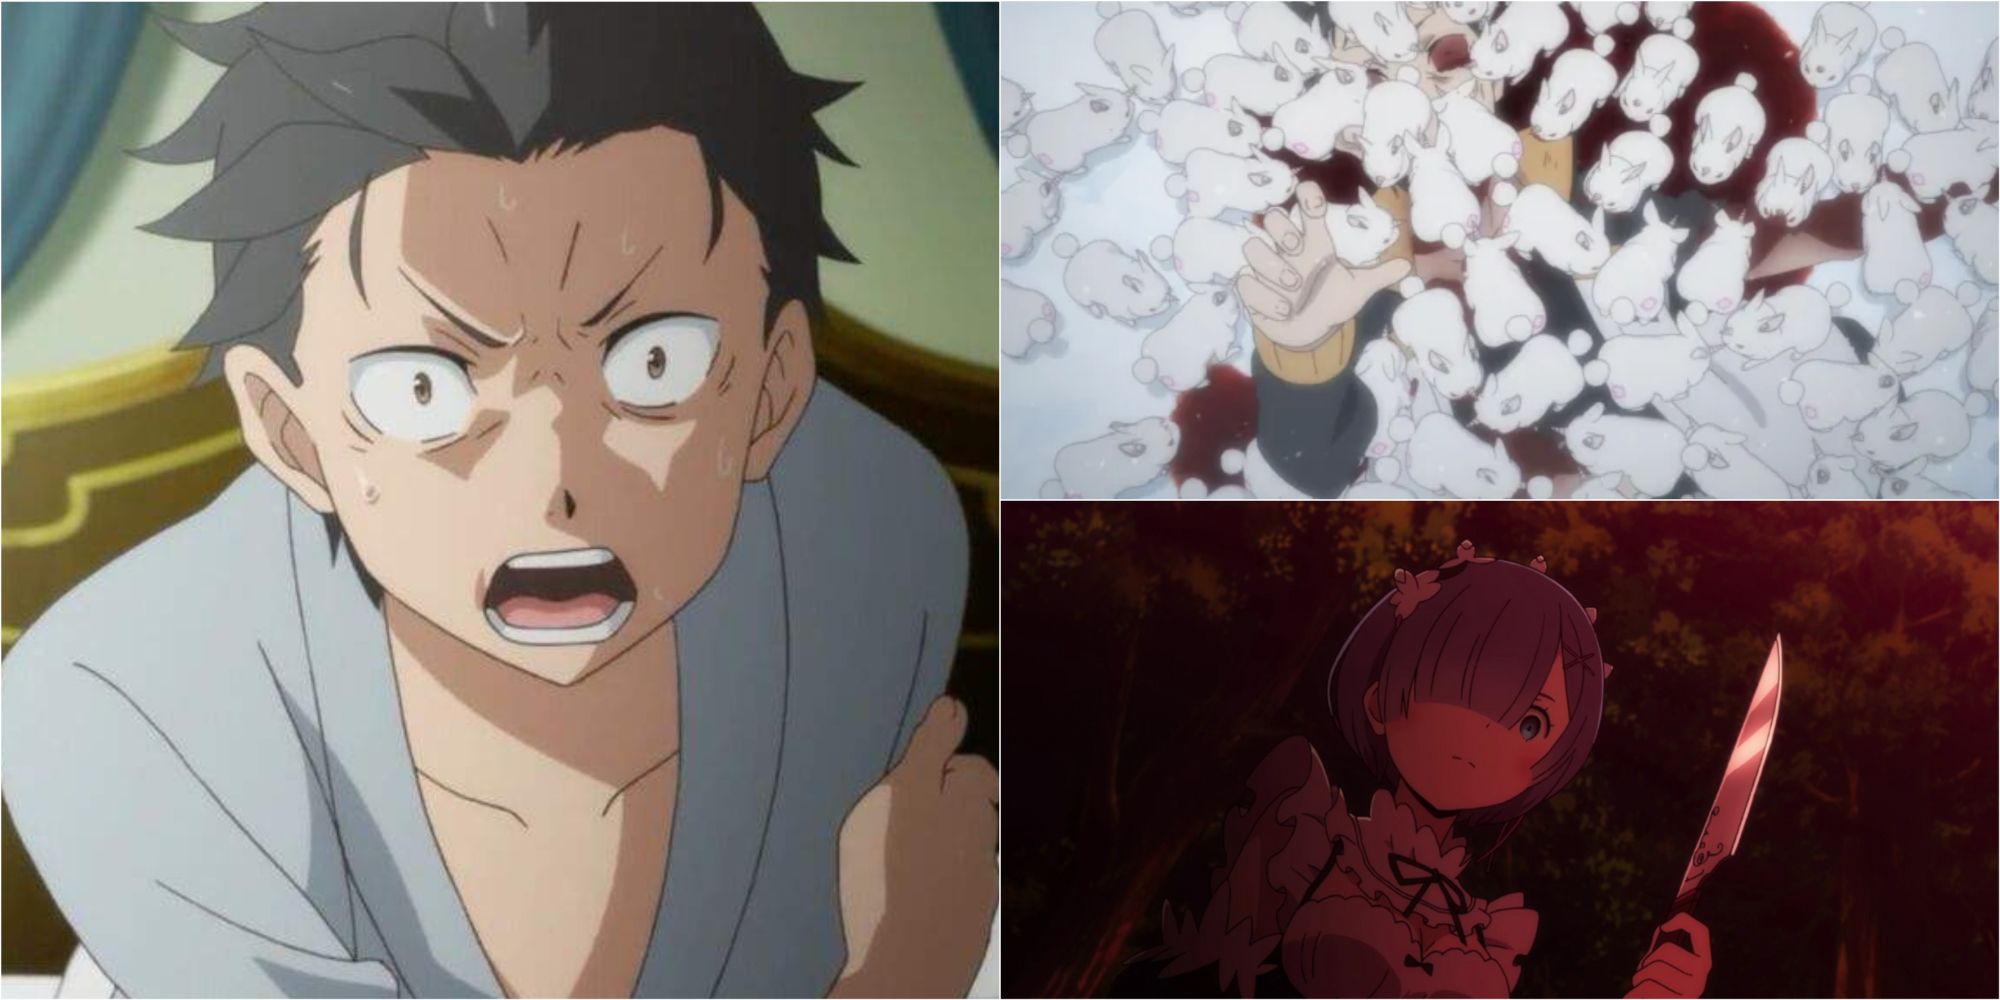 re:zero all of subaru's deaths in the anime featured image